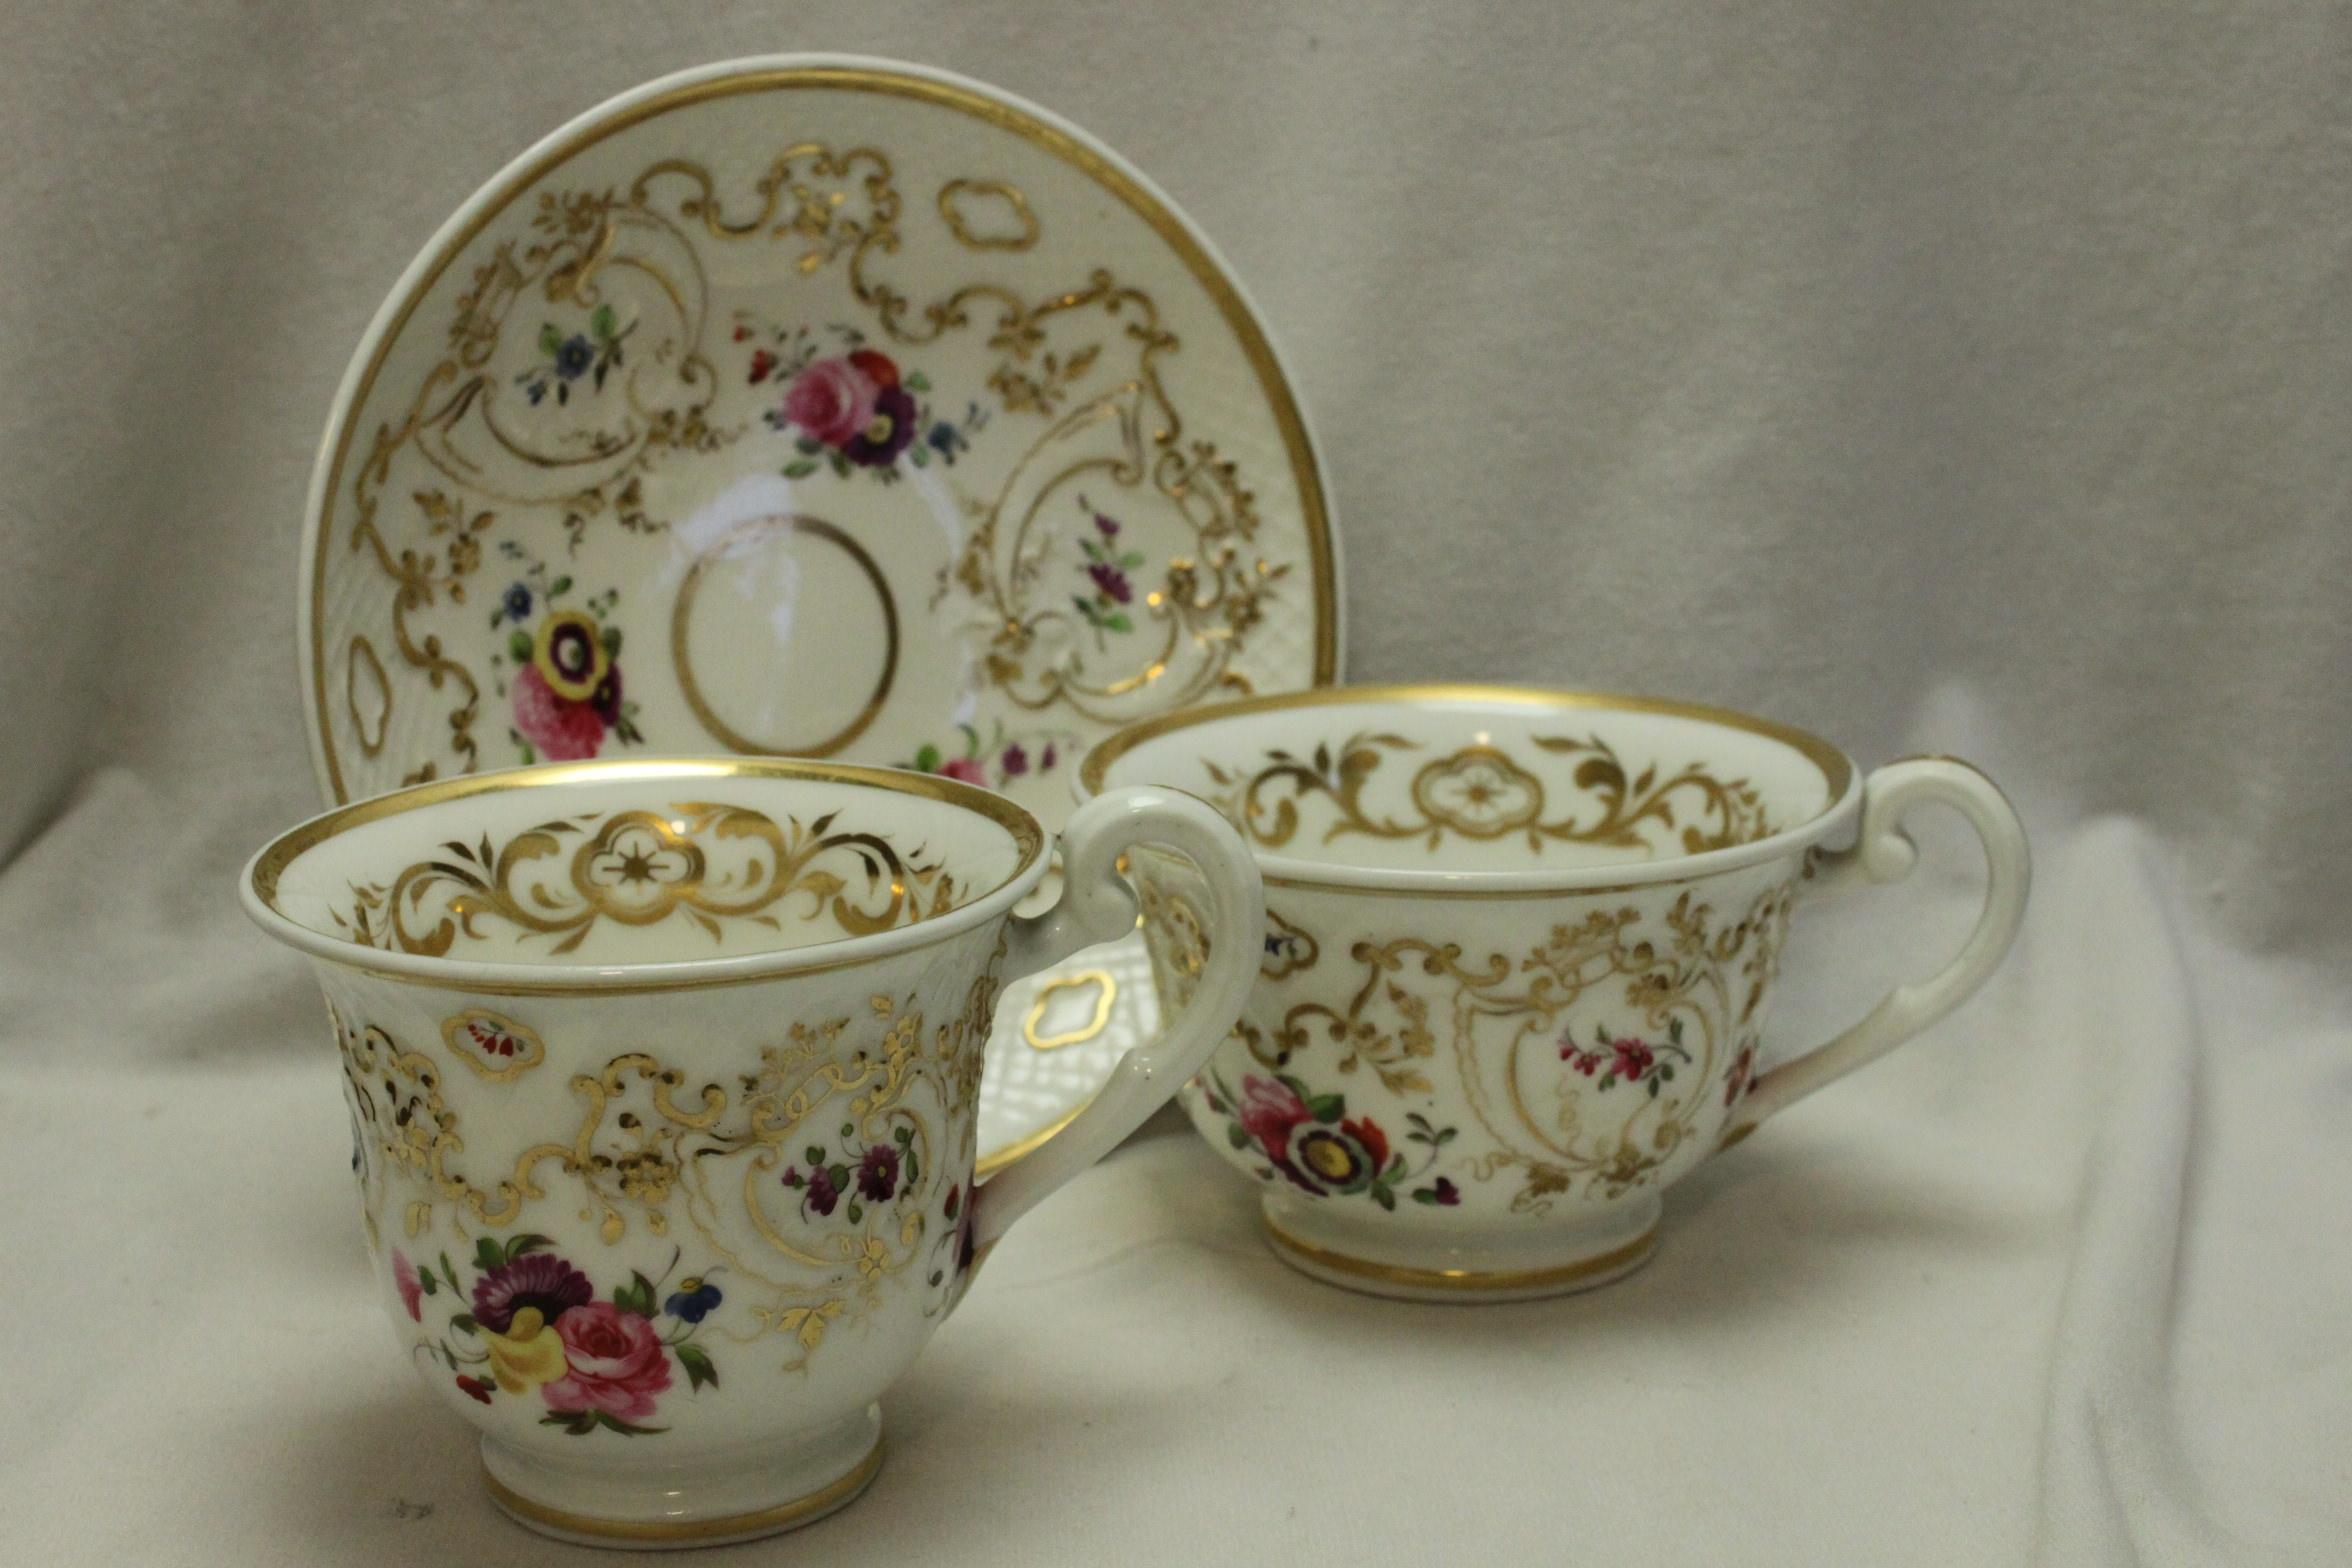 This delightful Ridgway hand painted and gilded porcelain trio is decorated with Ridgway's pattern 2/824 on their Round Embossed shape and comprises a tea cup, a coffee cup and a shared saucer. The gilding has been very delicately done and enhances